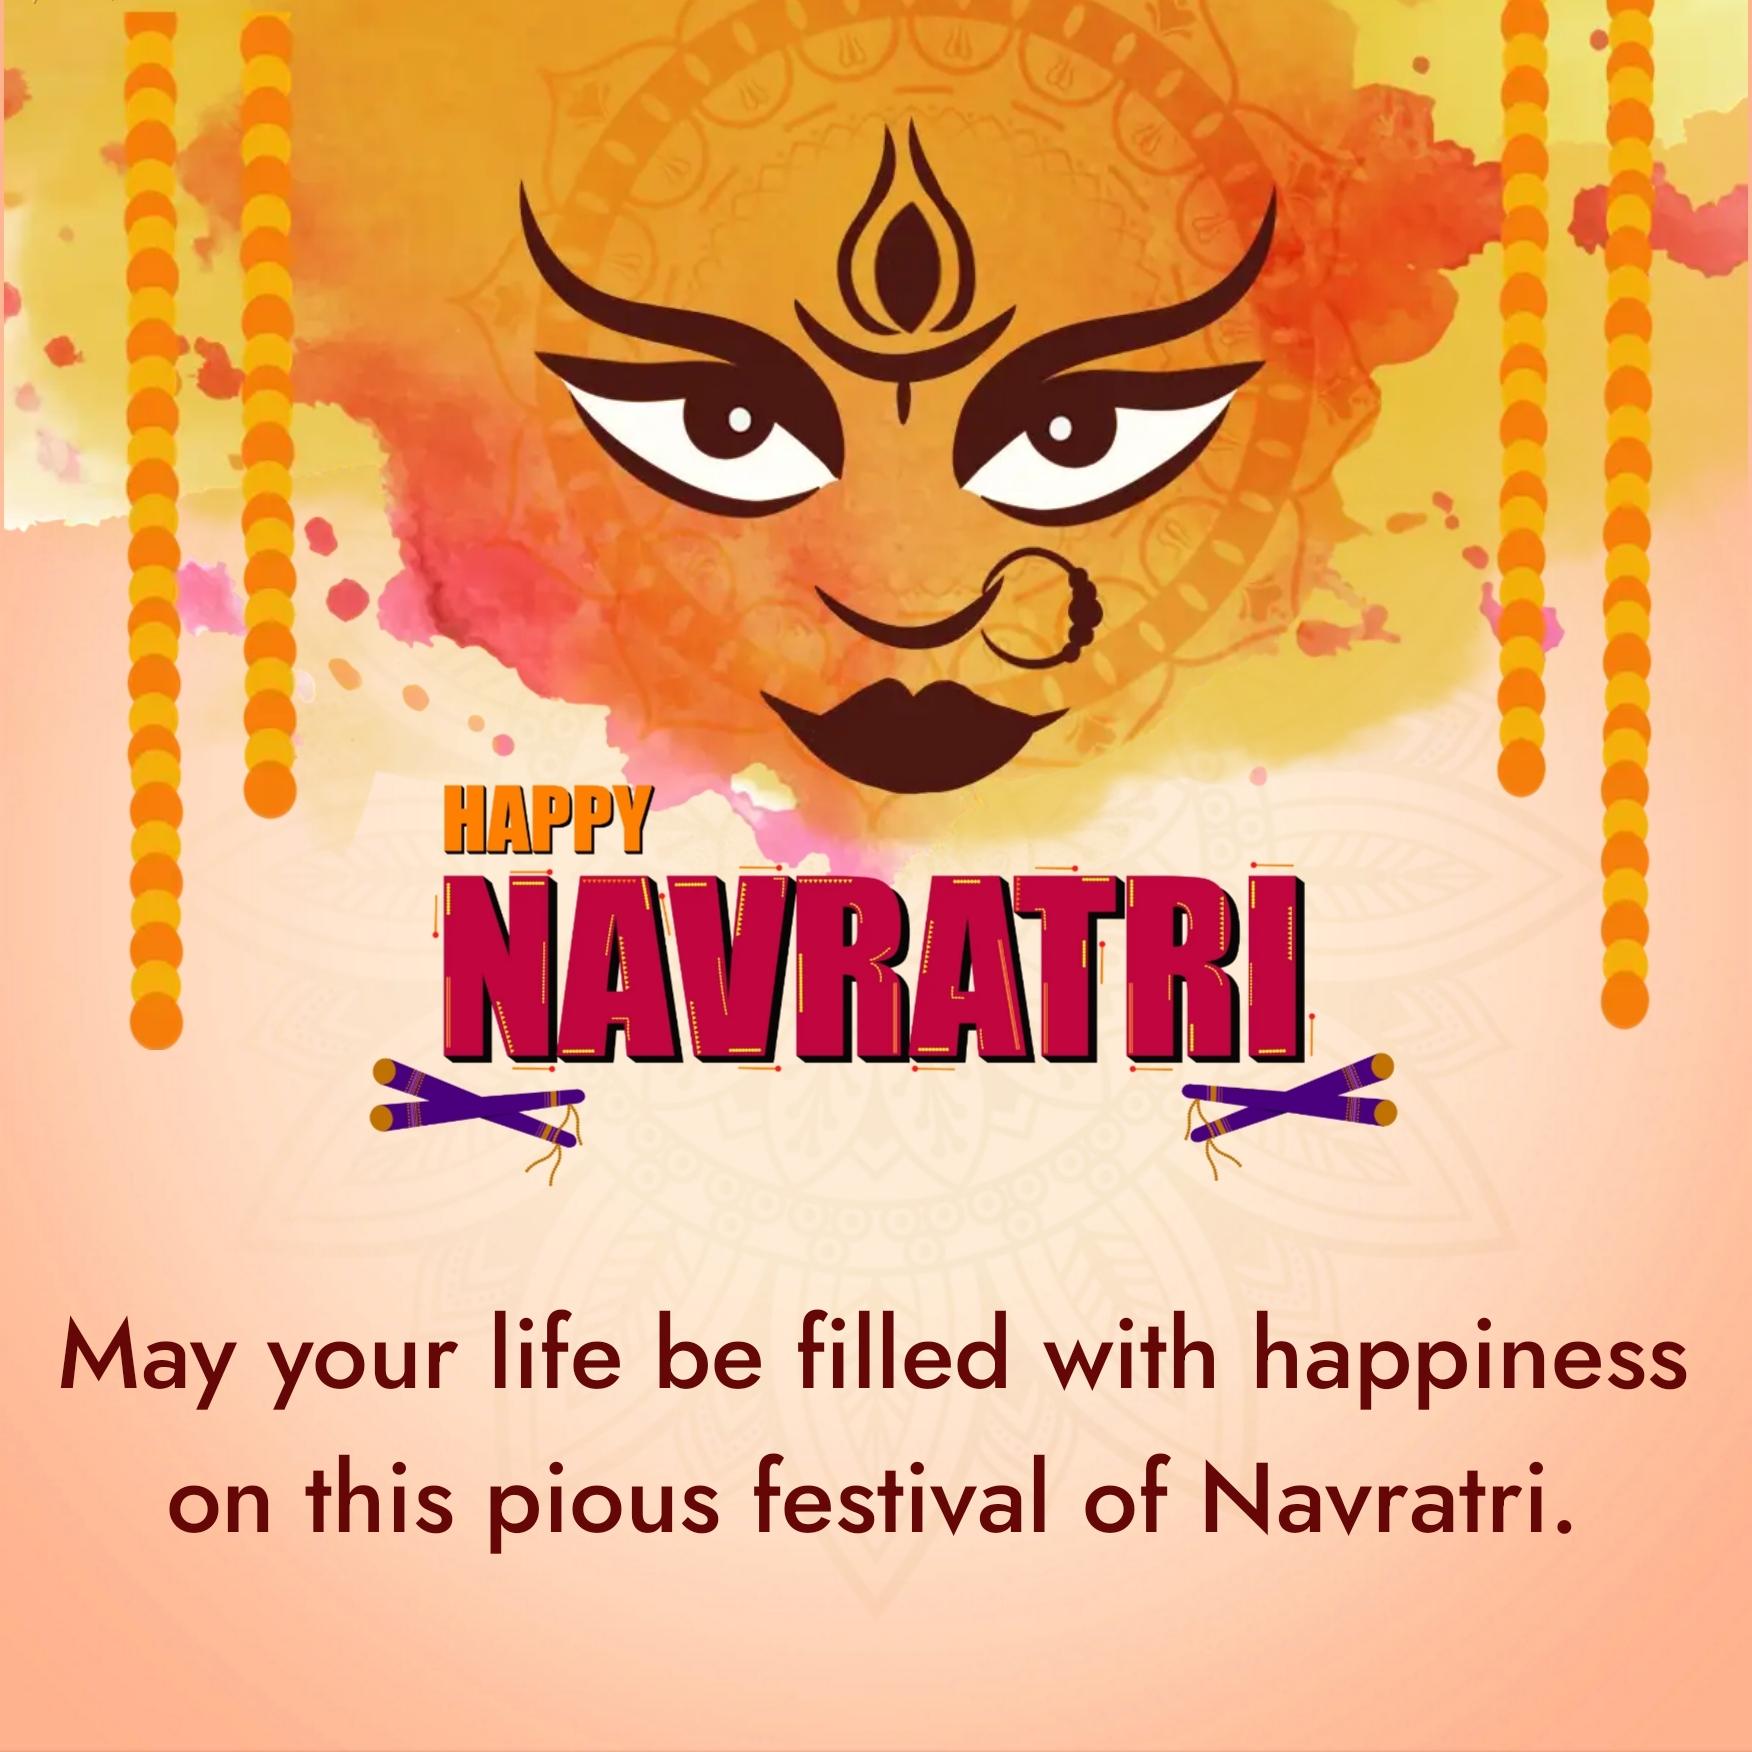 May your life be filled with happiness on this pious festival